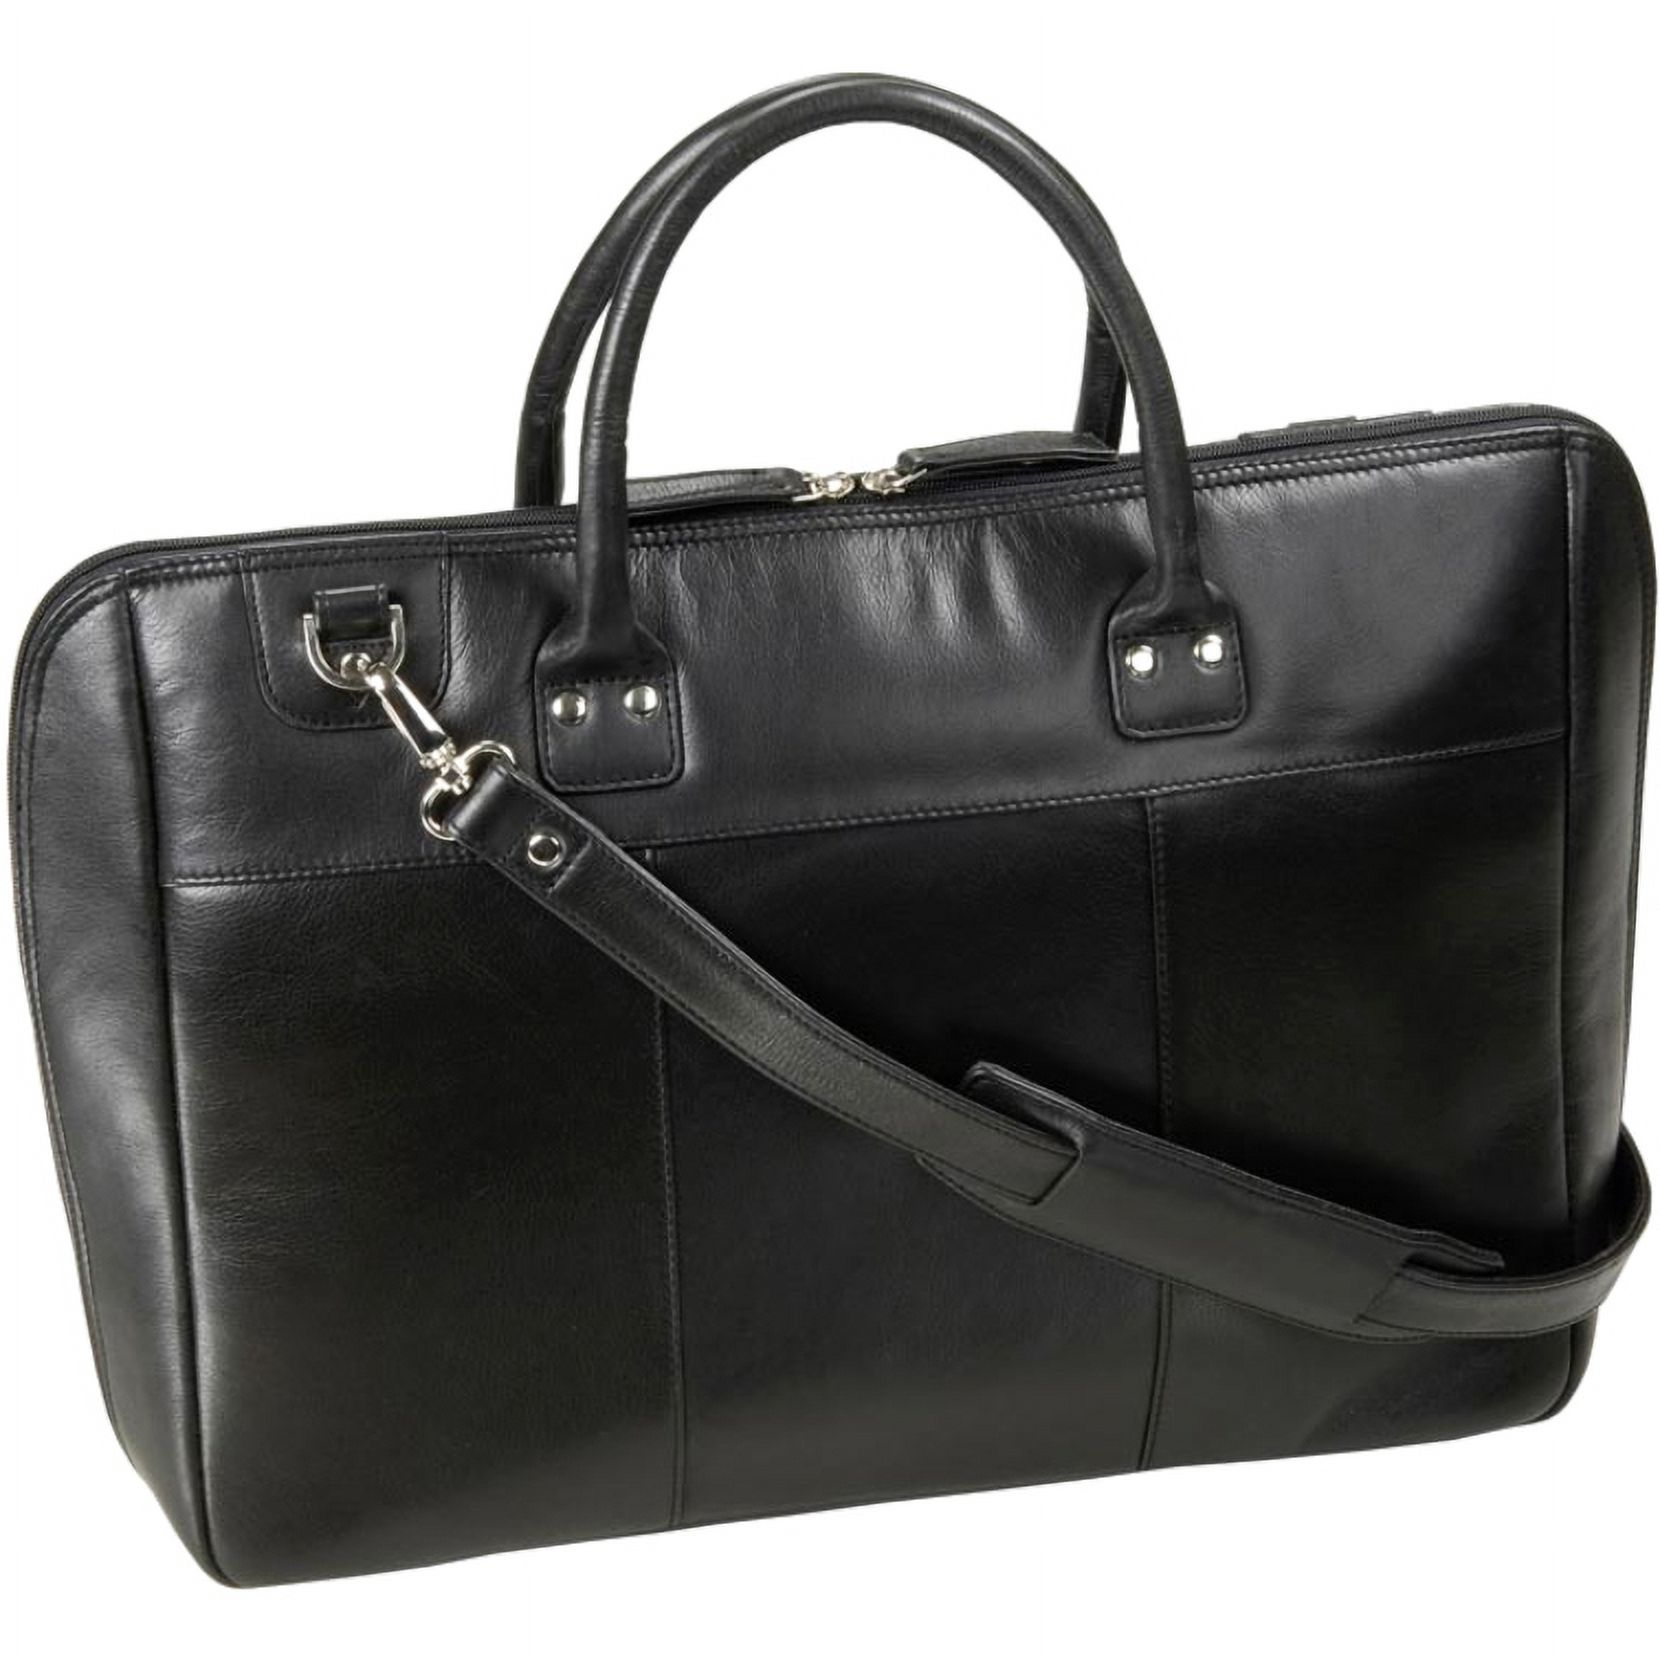 Winn Carrying Case (Tote) for 17" Notebook, Black - image 1 of 3